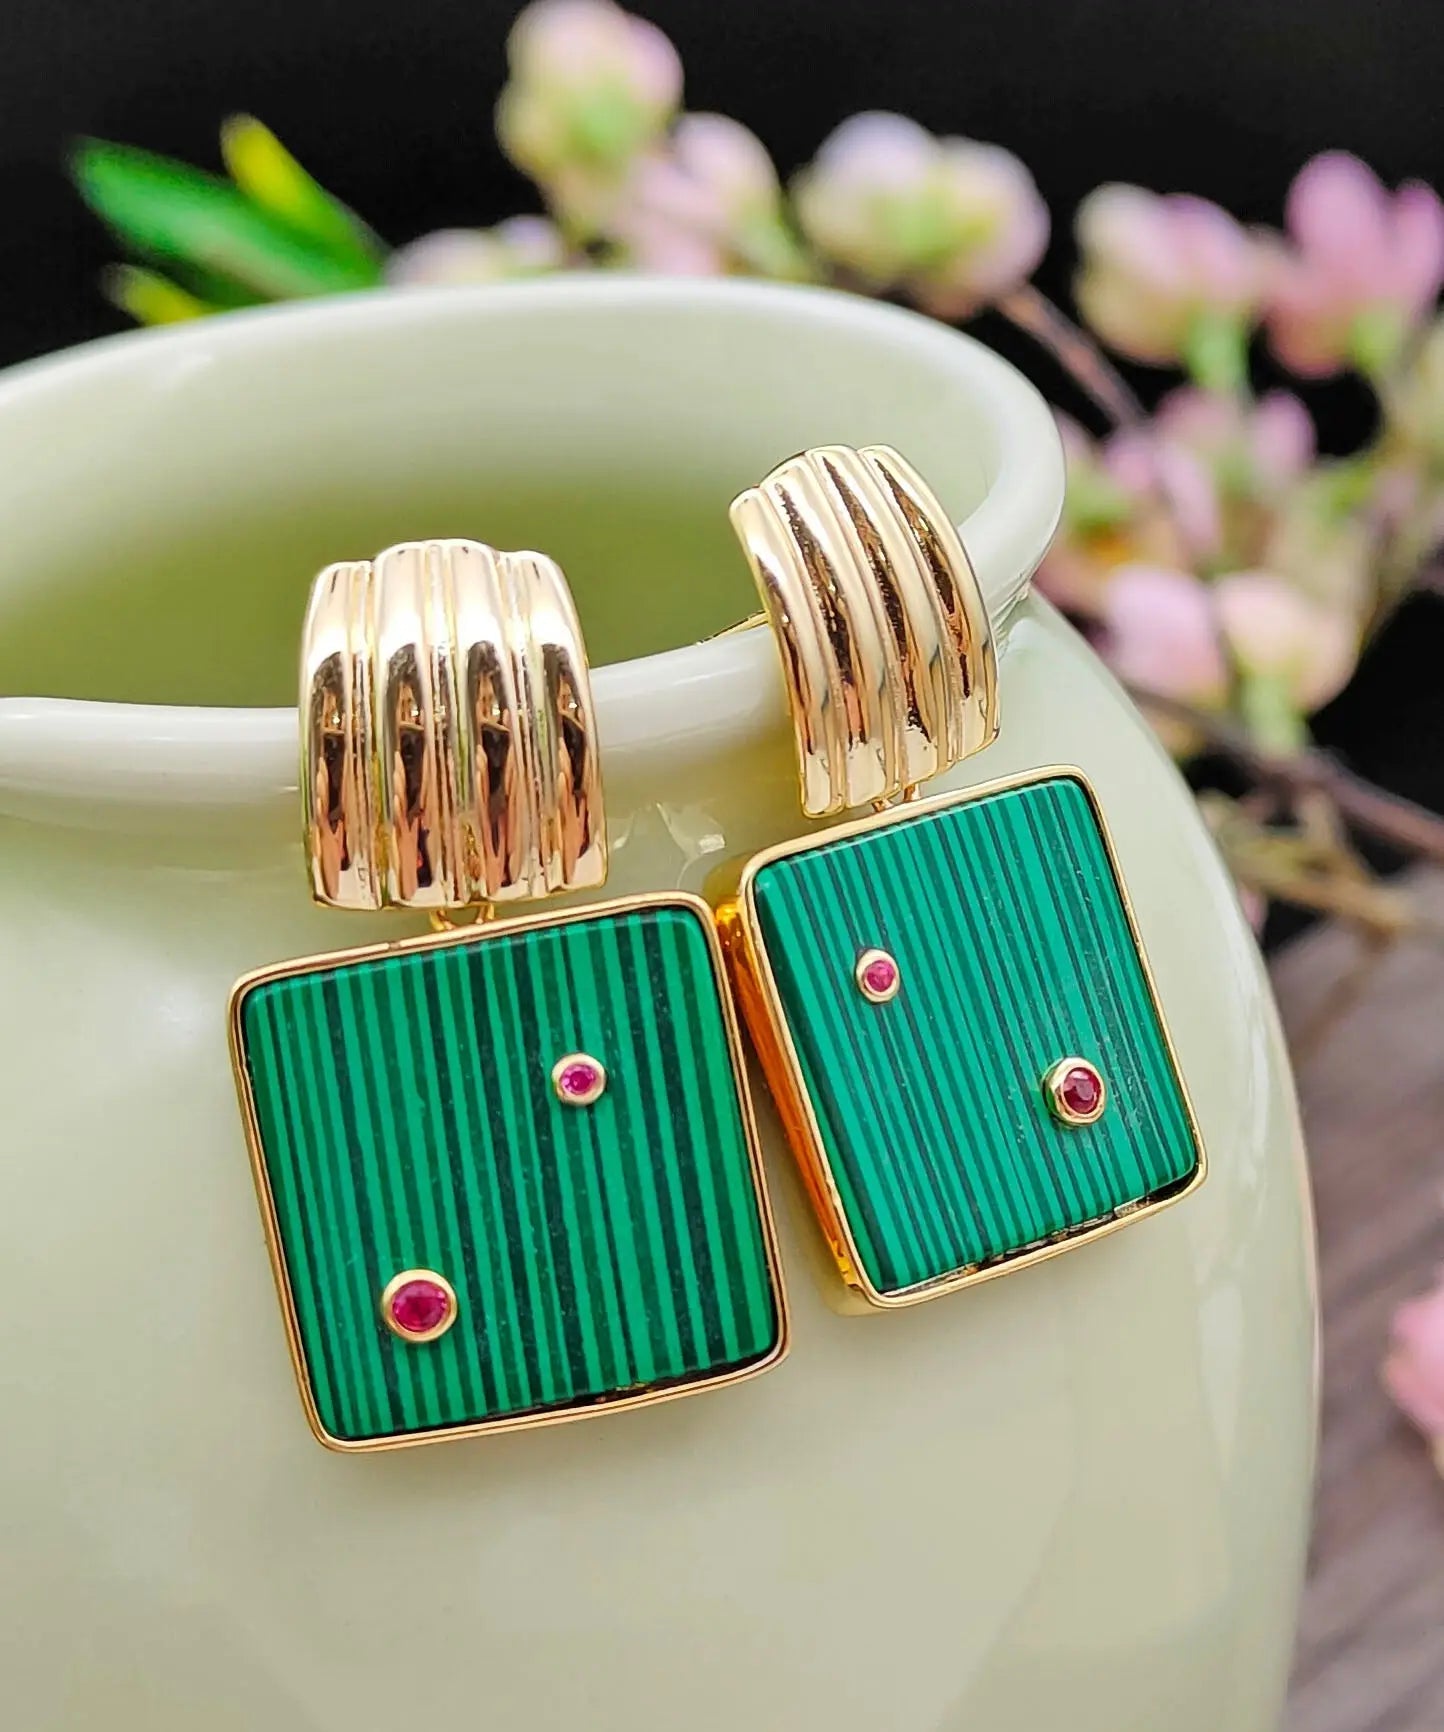 Unique Green Sterling Silver Overgild Inlaid Square Malachite Hoop Earrings Ada Fashion